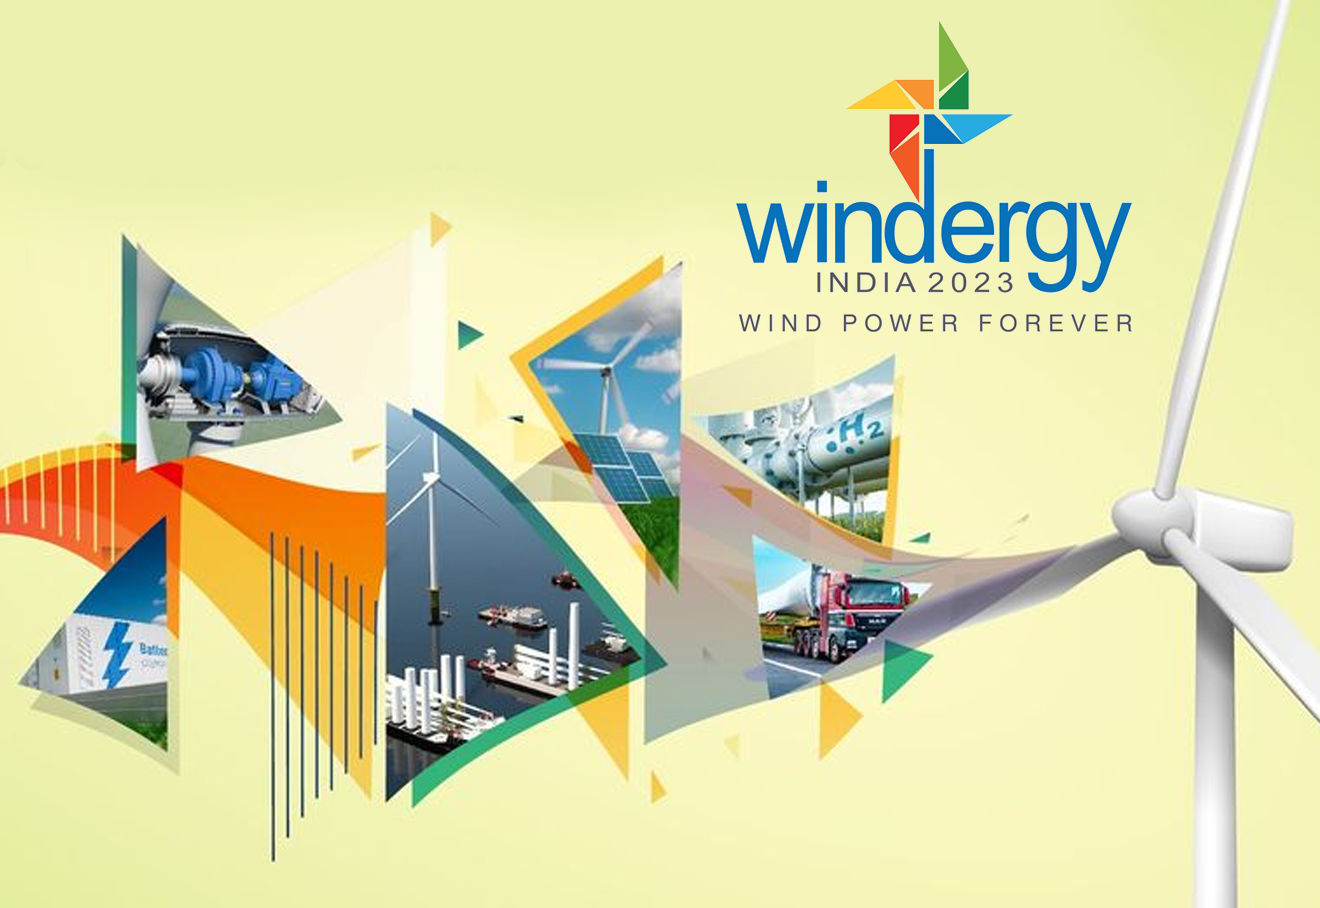 CM Stalin To Inaugurate Windergy 2023 In Chennai On Oct 4